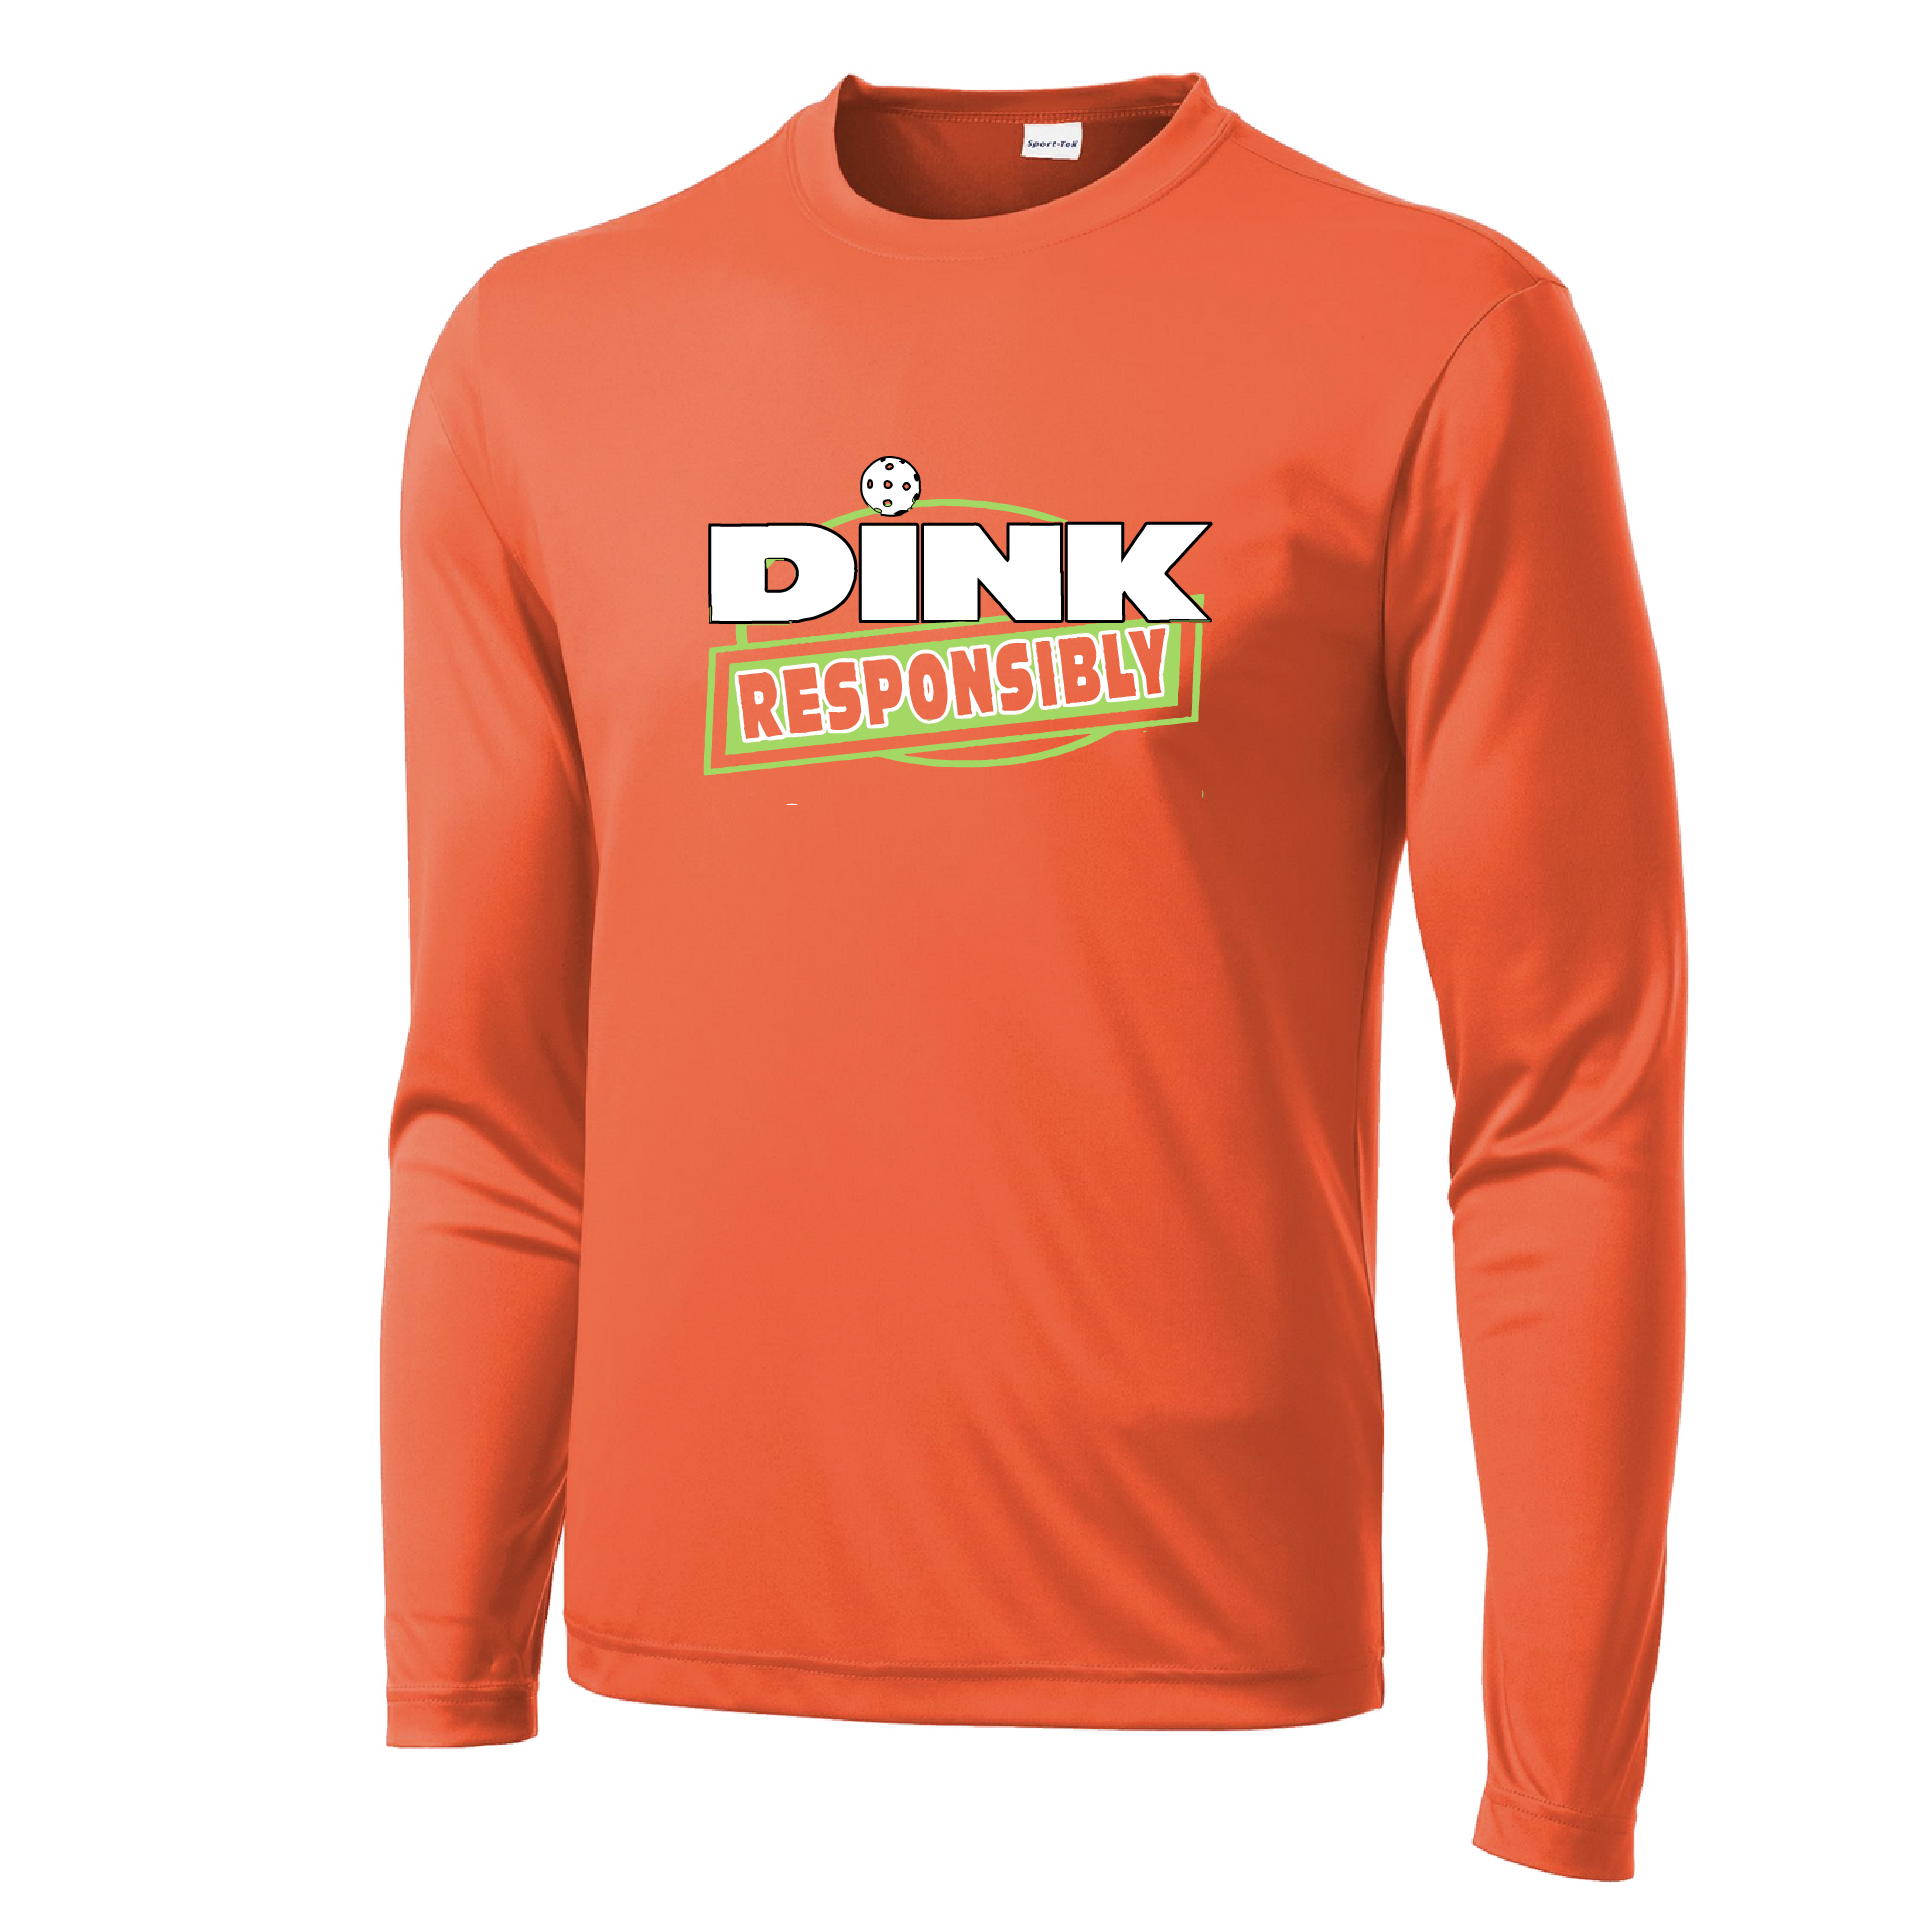 Pickleball Design: Dink Responsibly  Men's Style: Long Sleeve  Shirts are lightweight, roomy and highly breathable. These moisture-wicking shirts are designed for athletic performance. They feature PosiCharge technology to lock in color and prevent logos from fading. Removable tag and set-in sleeves for comfort